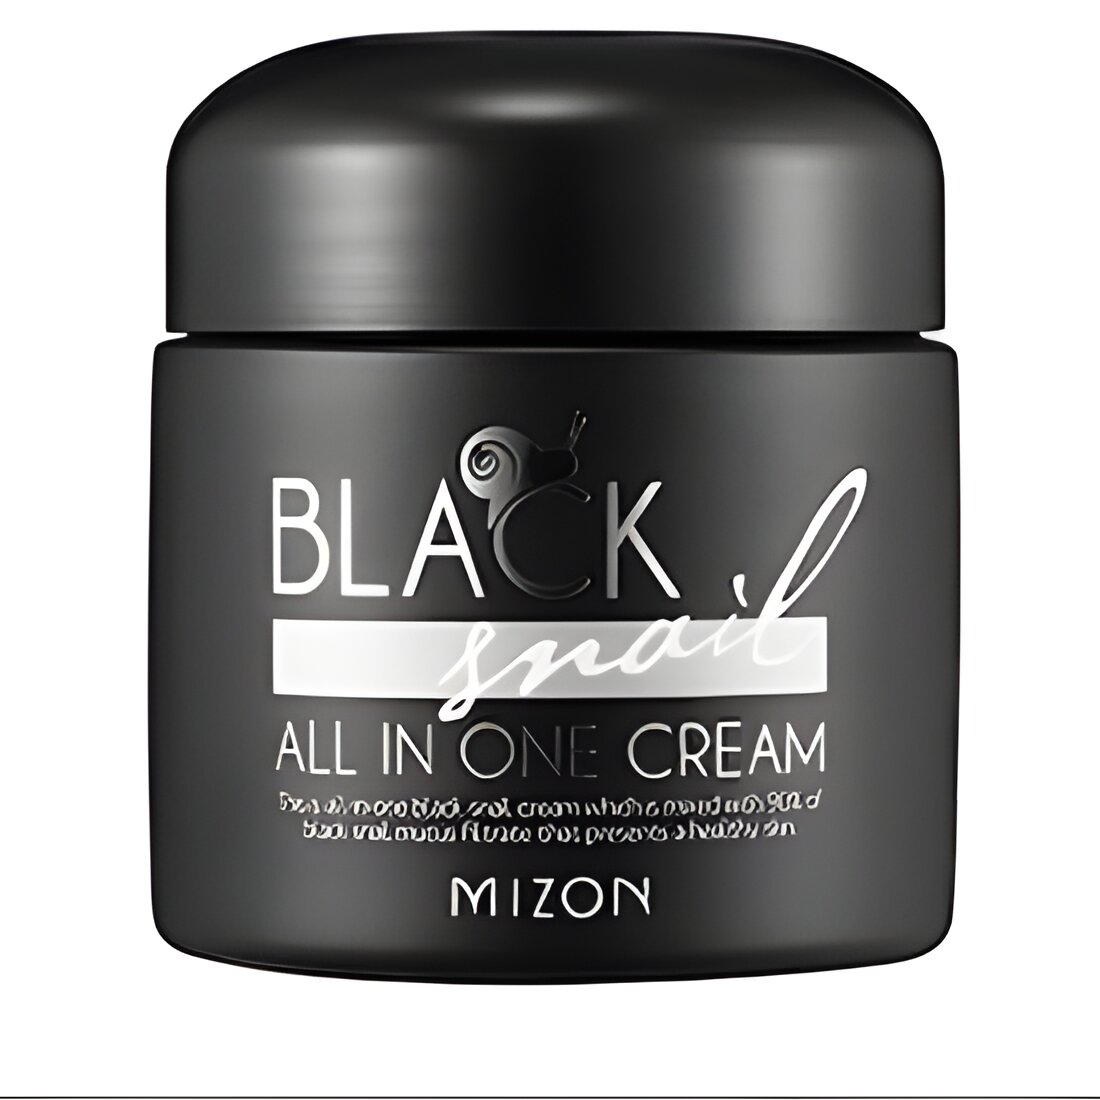 Free Black Snail All In One Cream